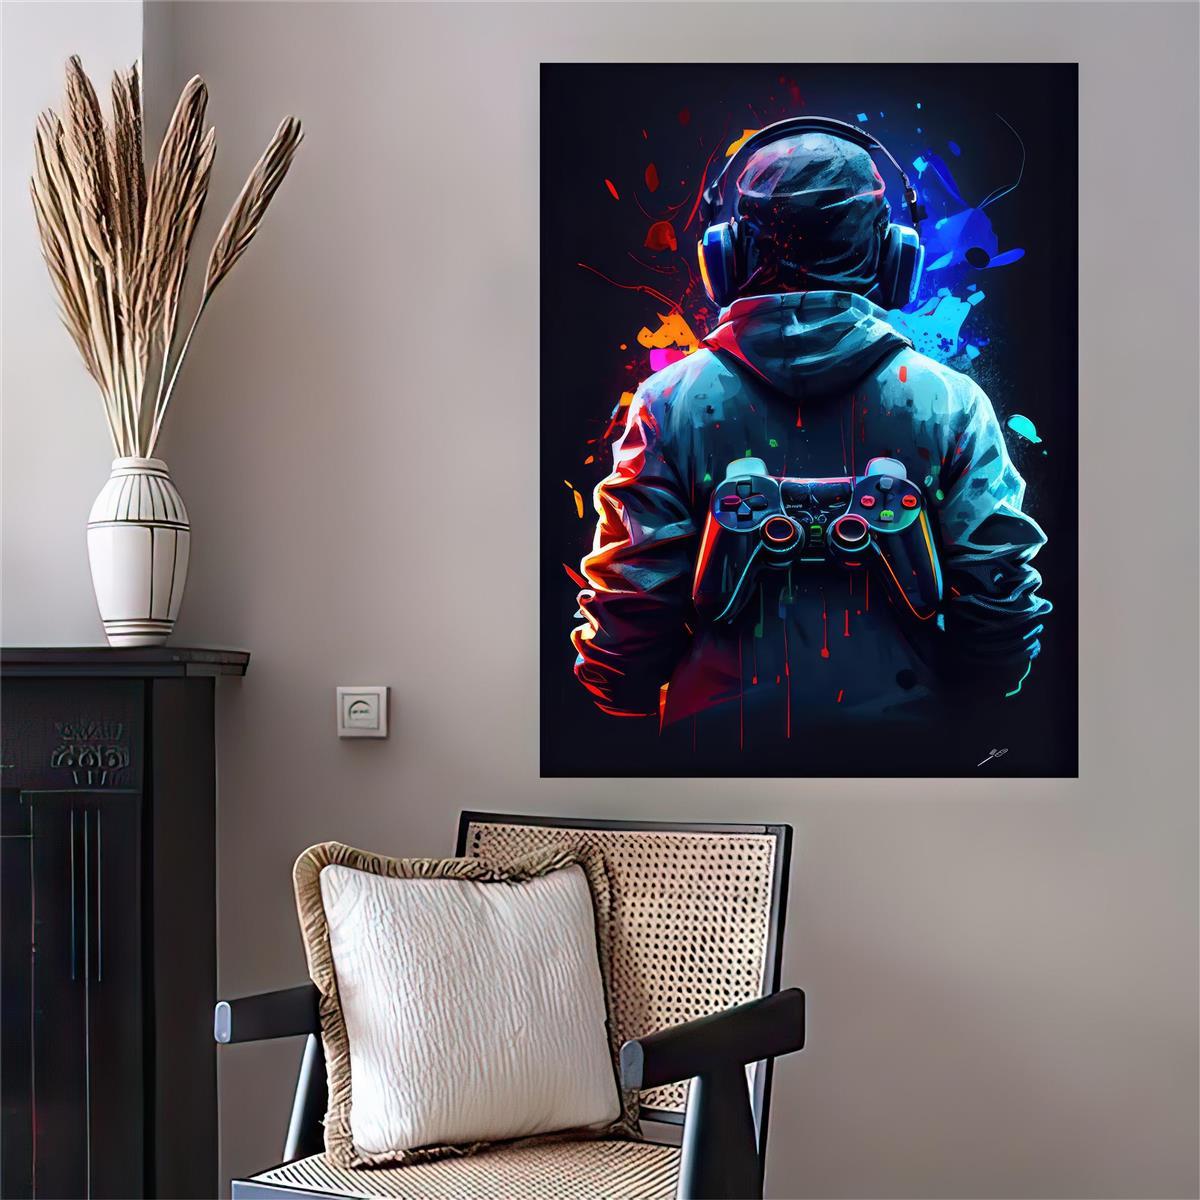 Game Room Decor - Gaming Gifts for PC Gamer, Xbox, PS4, Playstation, Video  Game, Arcade, Men, Teens, Kids - Remote Control Wall Art - Urban Graffiti